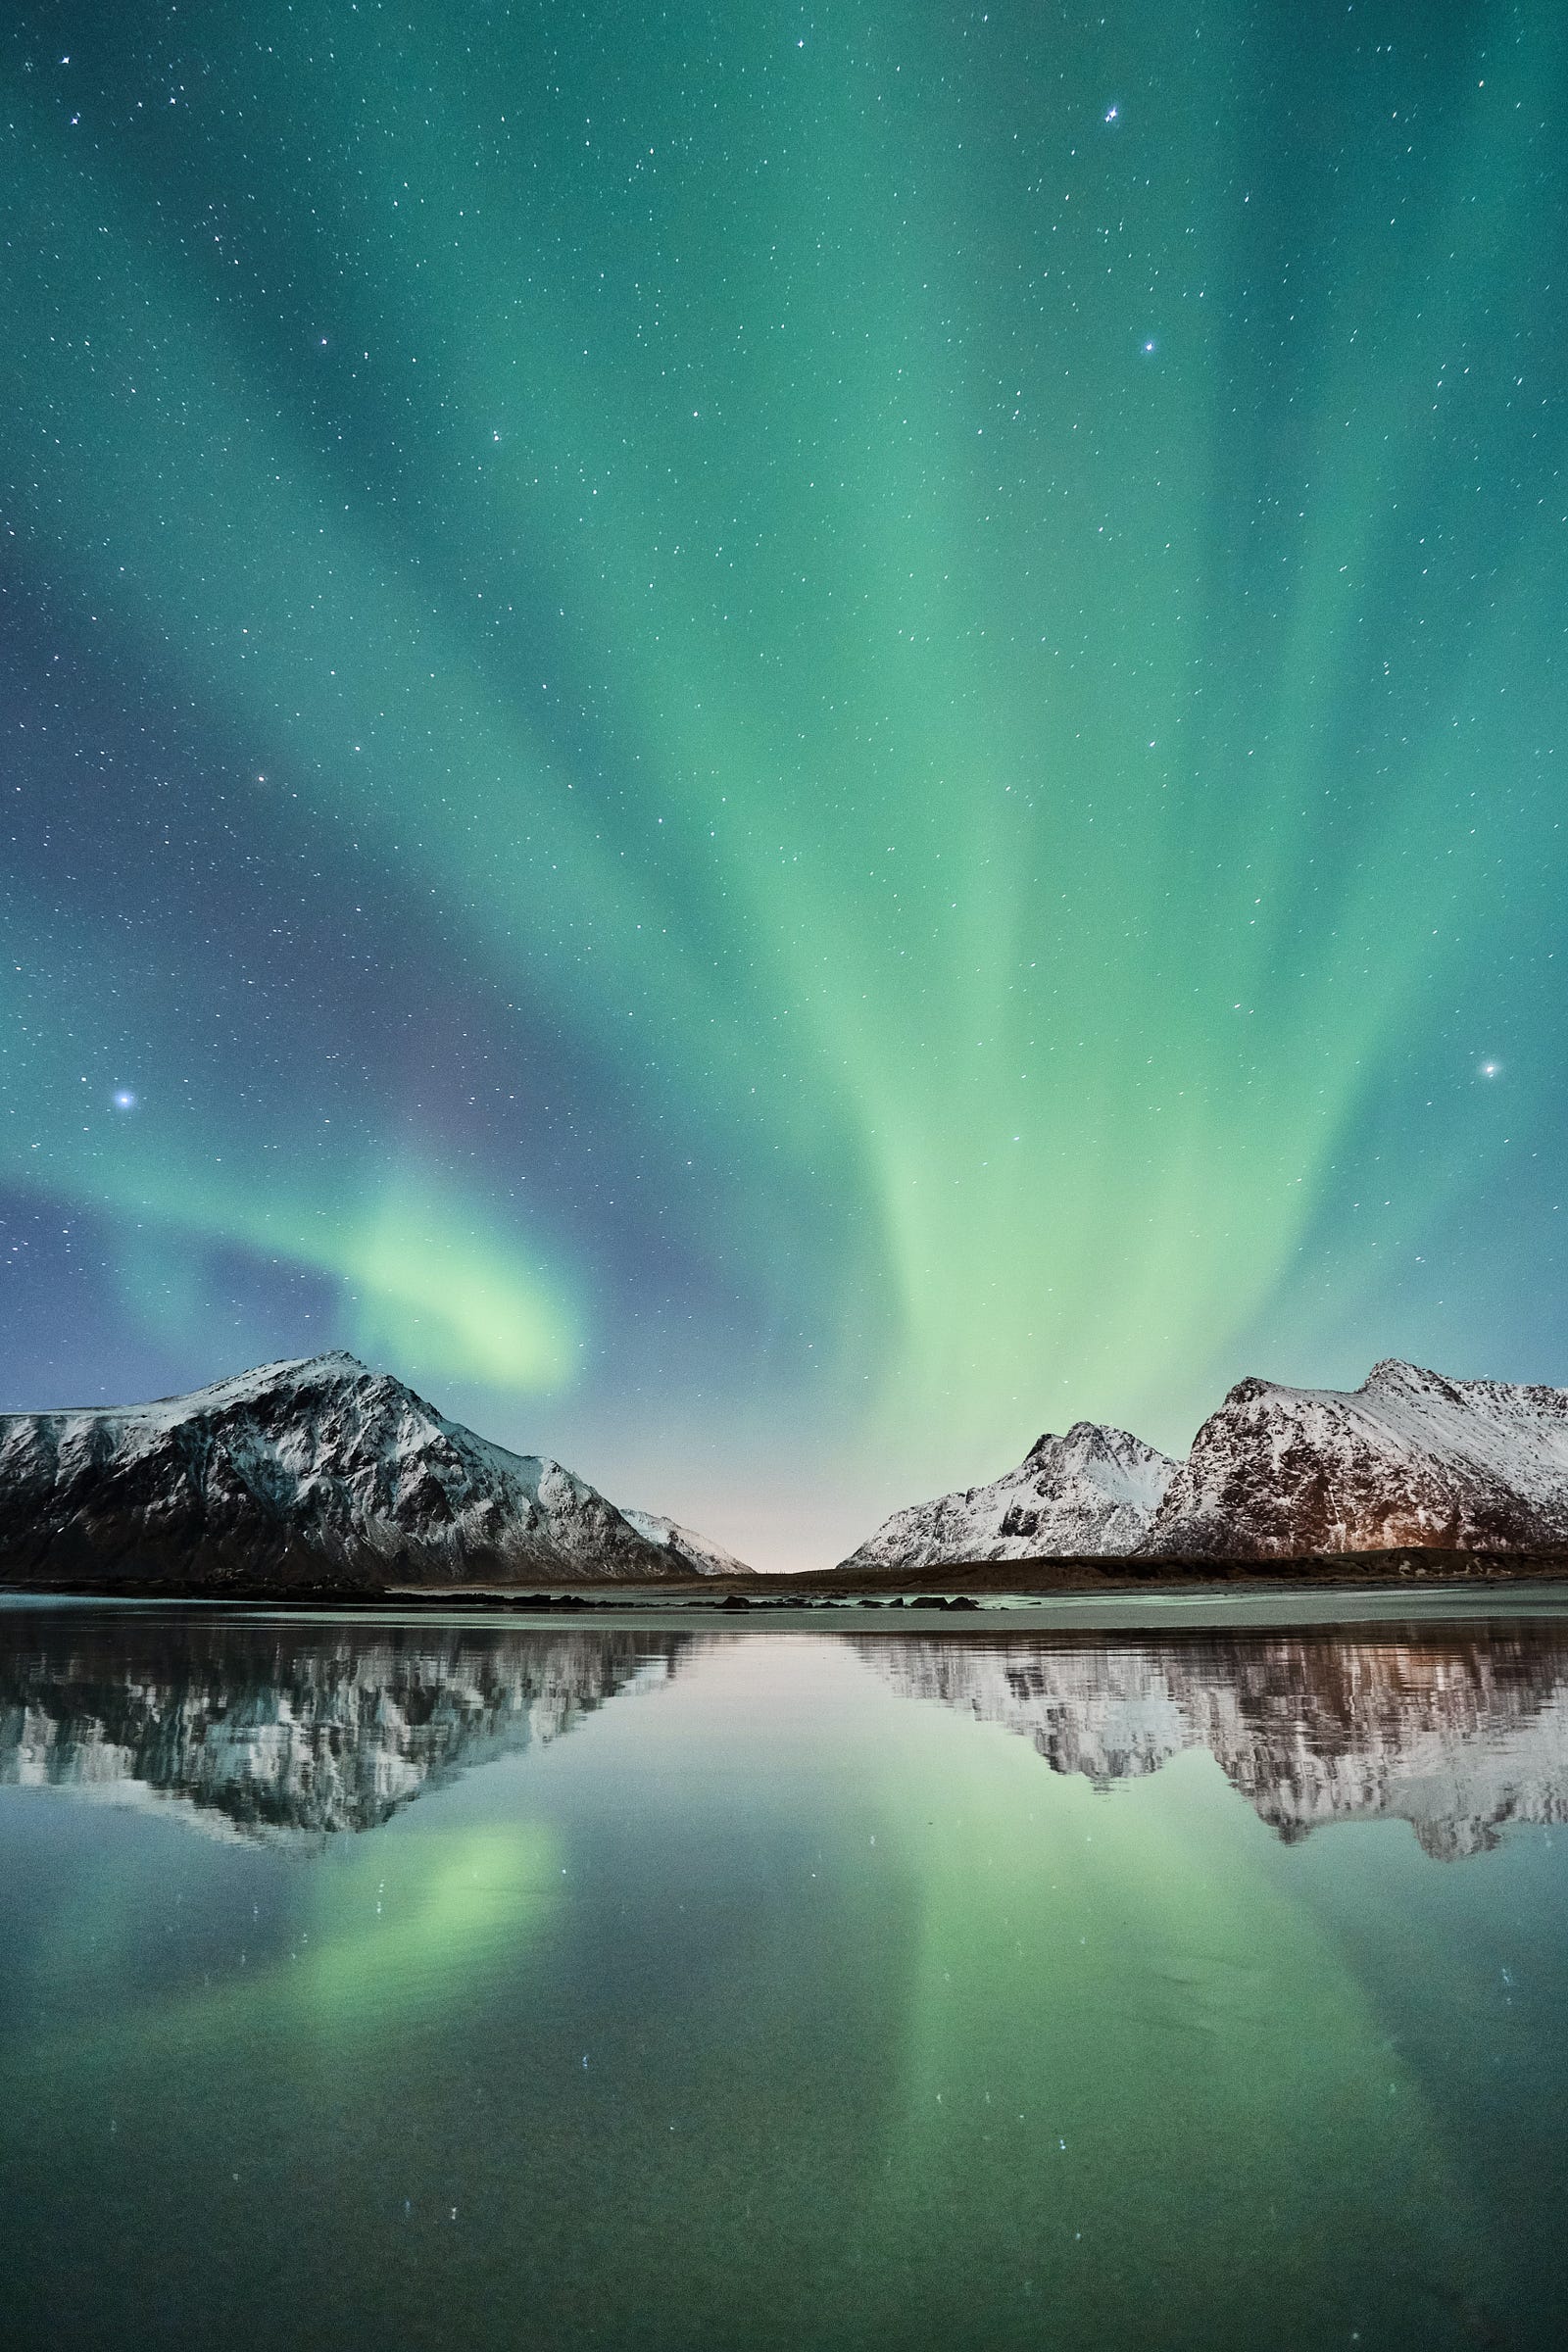 A green aurora borealis. The renowned Nordic diet, akin to the Mediterranean diet, has been associated with a reduced risk of chronic diseases and may contribute to increased longevity.